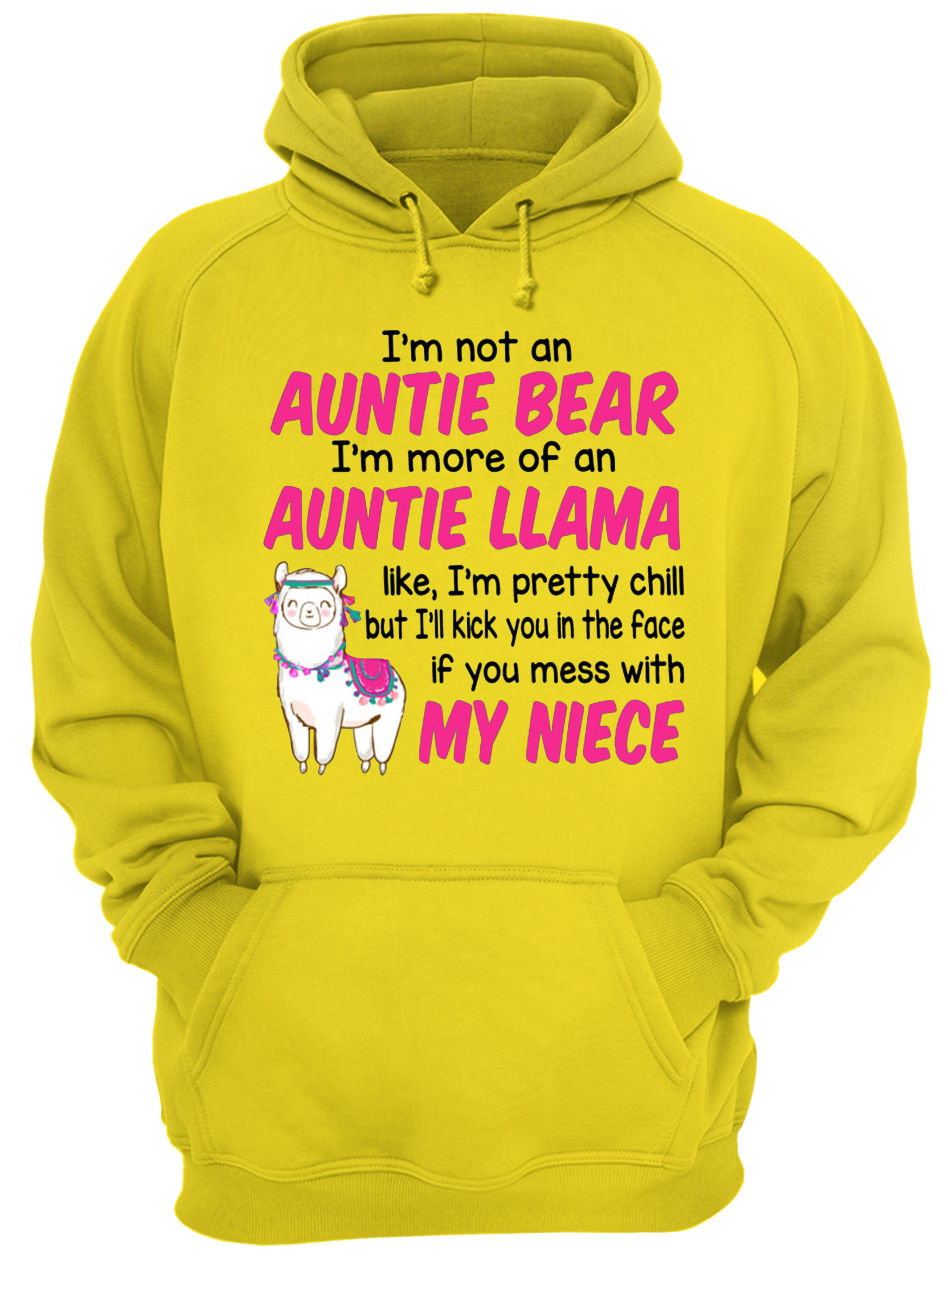 I’m not an auntie bear I’m more of an auntie llama like hoodie